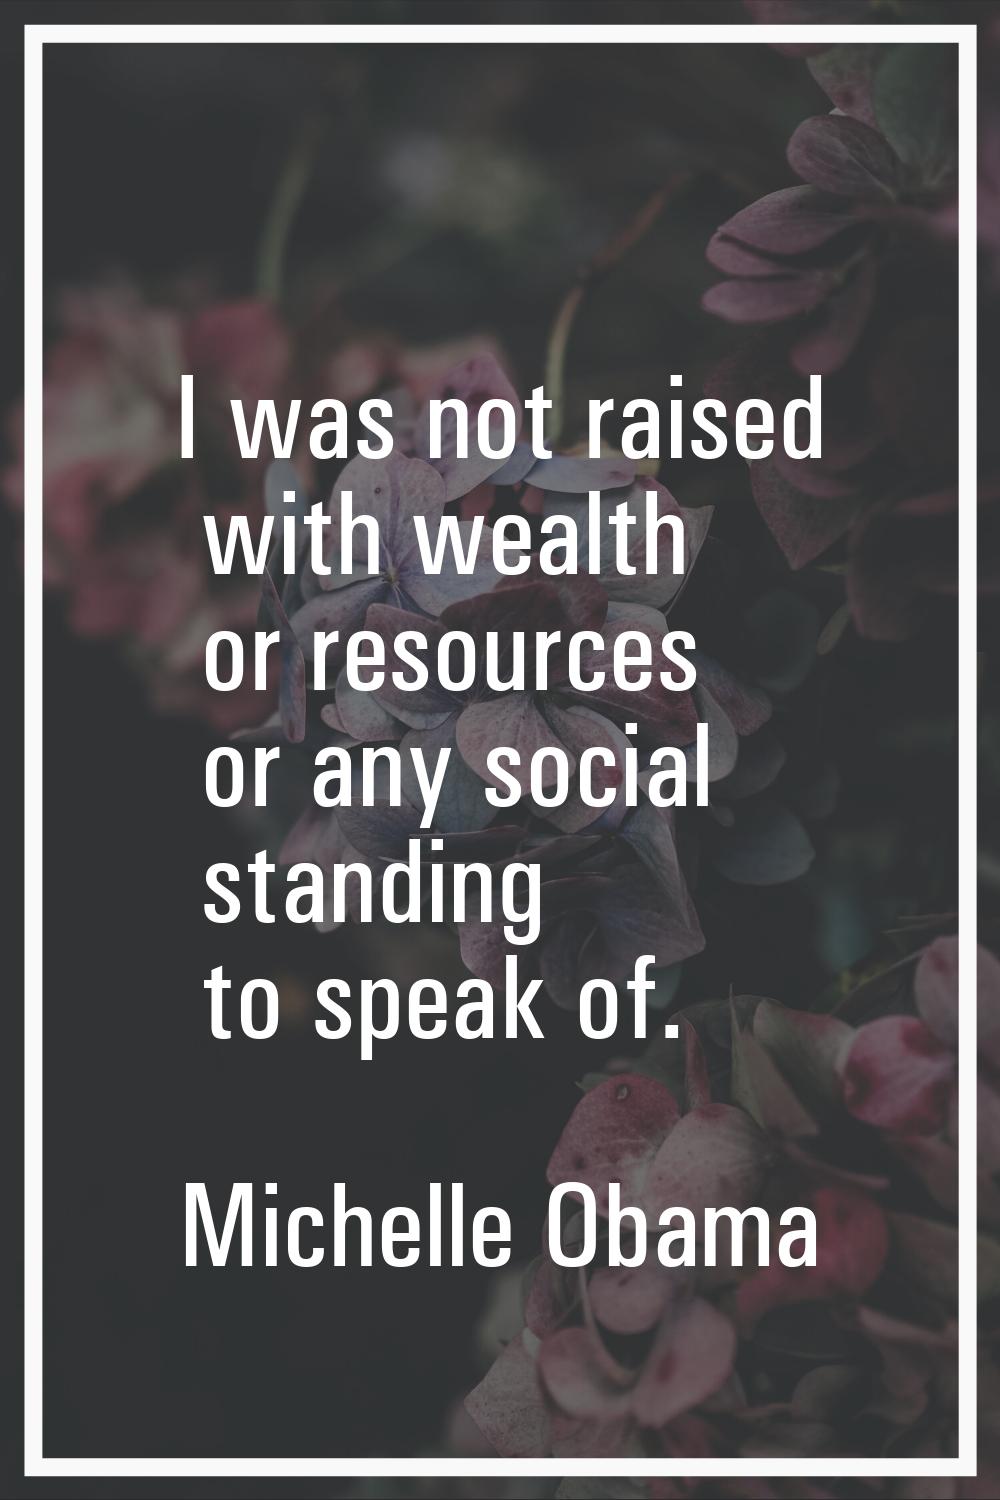 I was not raised with wealth or resources or any social standing to speak of.